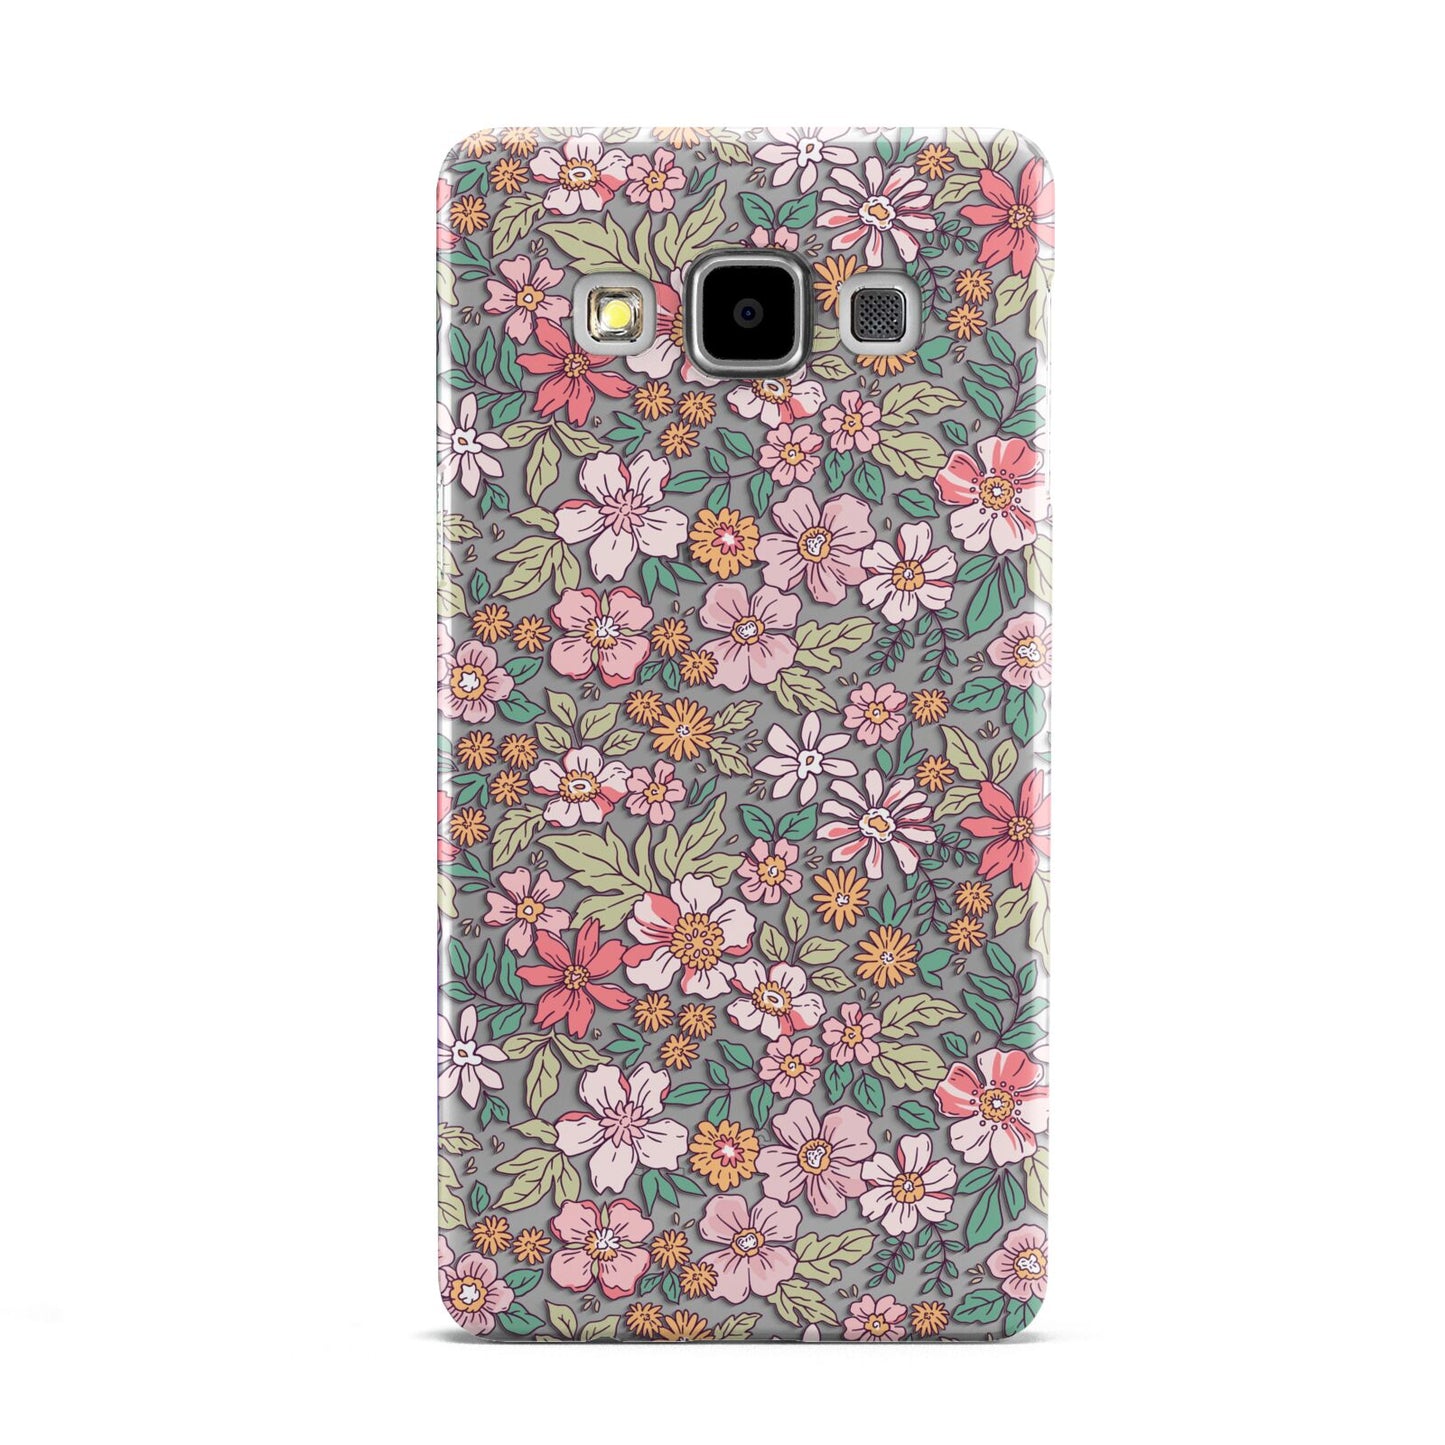 Small Floral Pattern Samsung Galaxy A5 Case